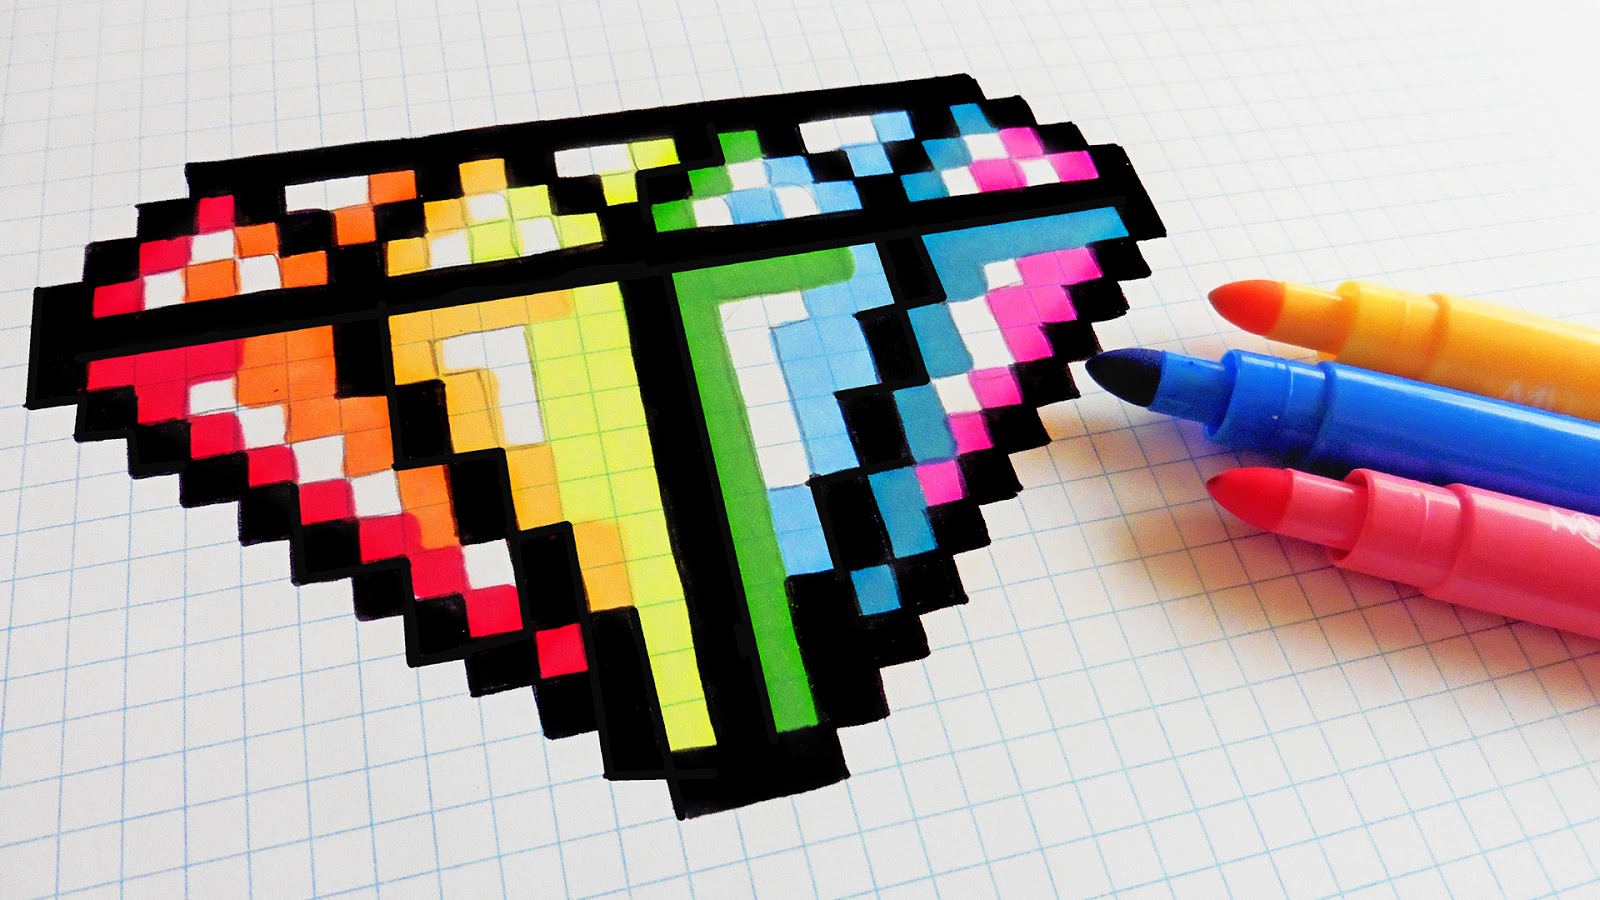 Great How To Draw Pixel Art in the world Learn more here 